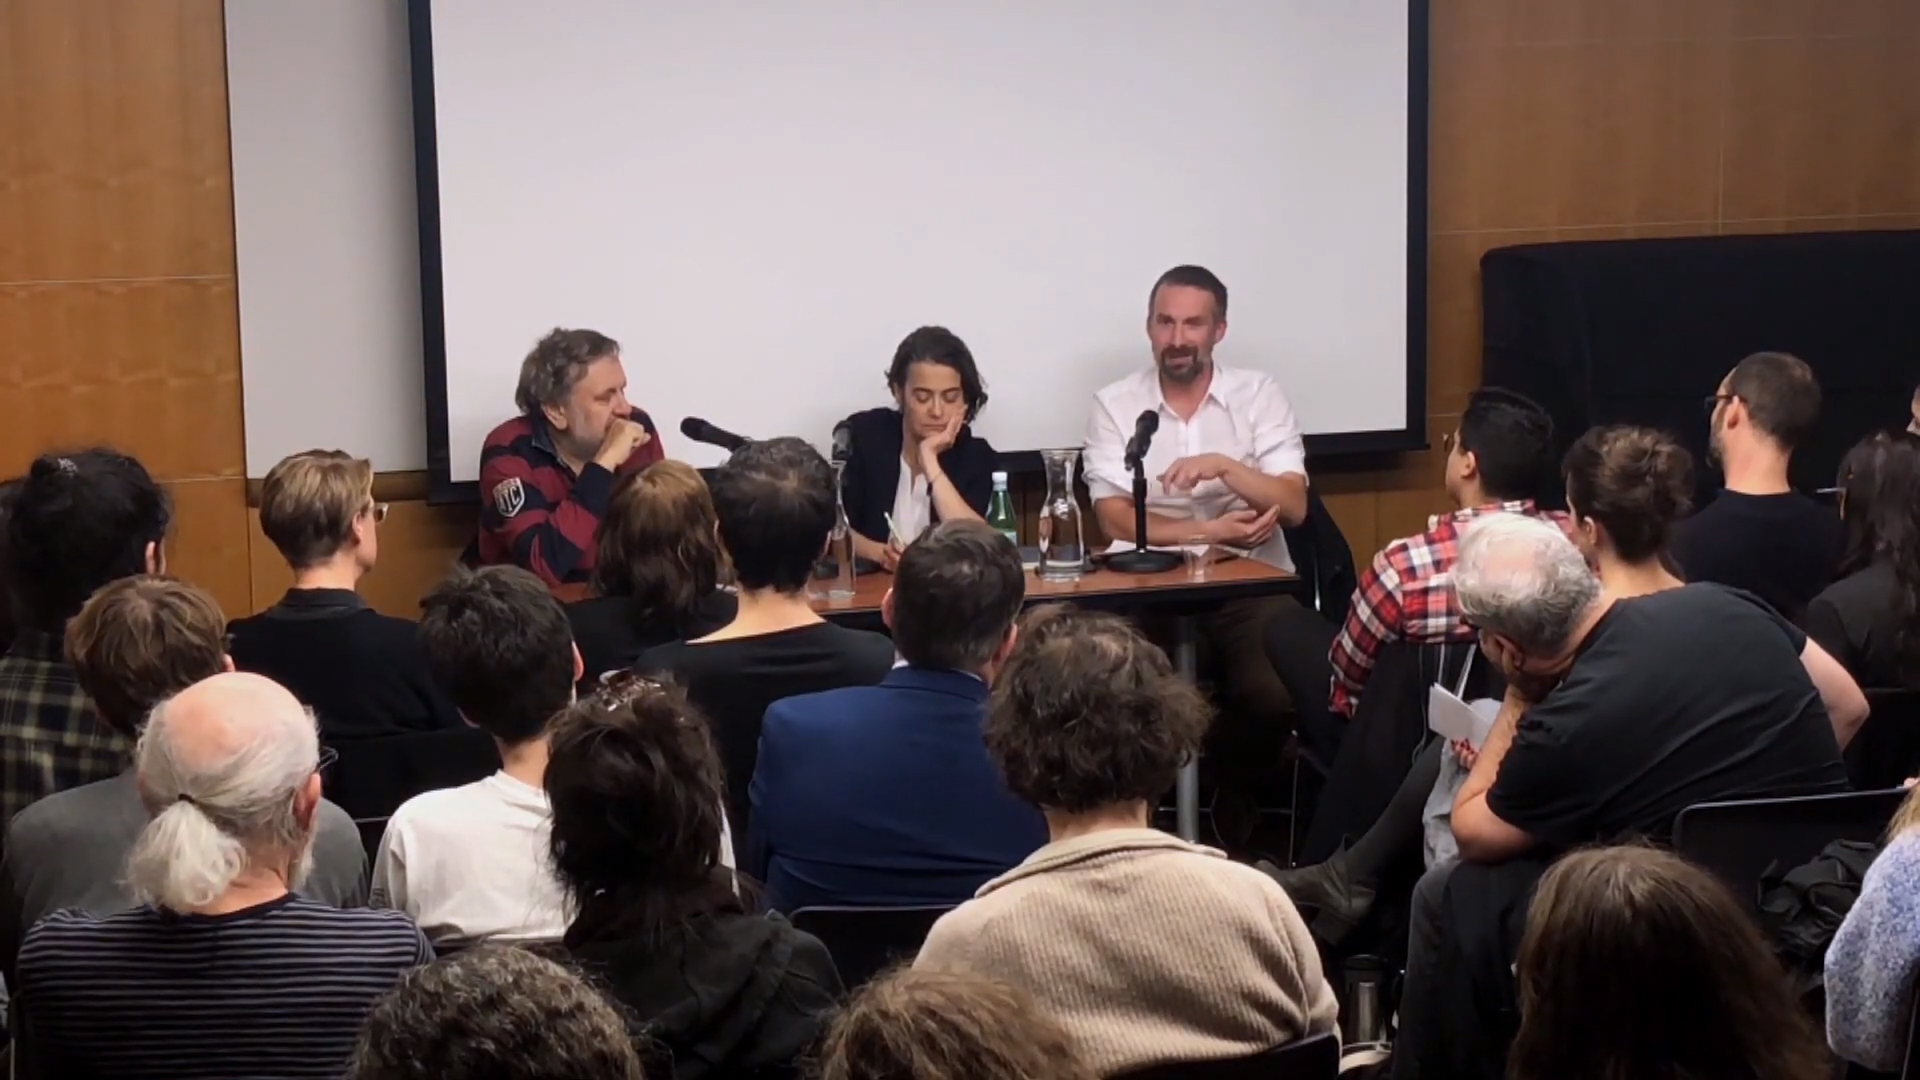 Slavoj-zizek-rebecca-comay-frank-ruda-the-dash-the-other-side-of-absolute-knowing.jpg